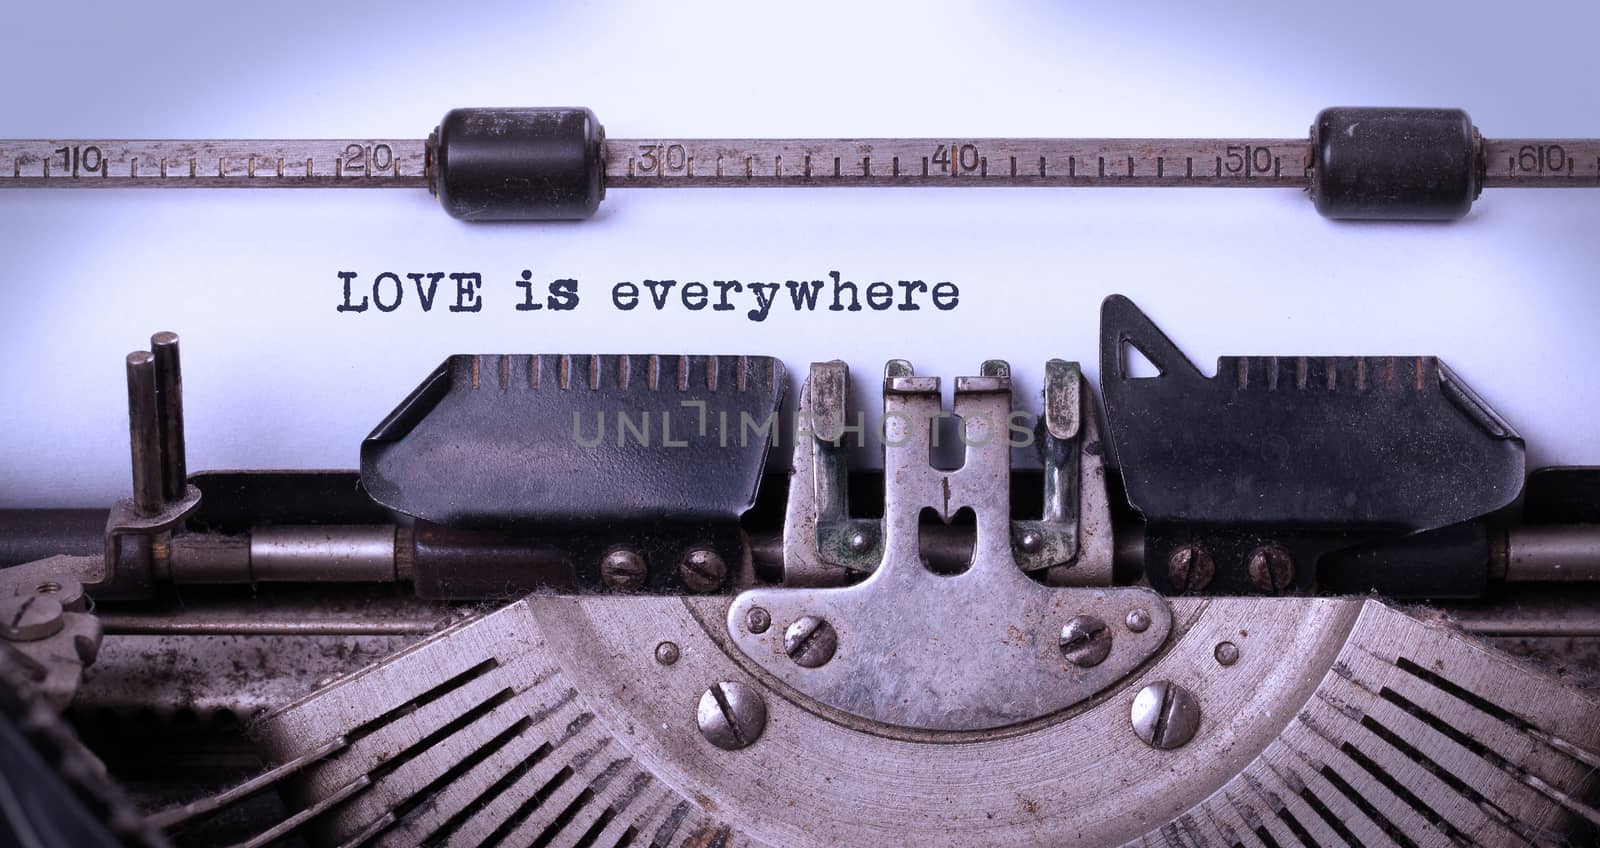 Love is everywhere, written on an old typewriter by michaklootwijk